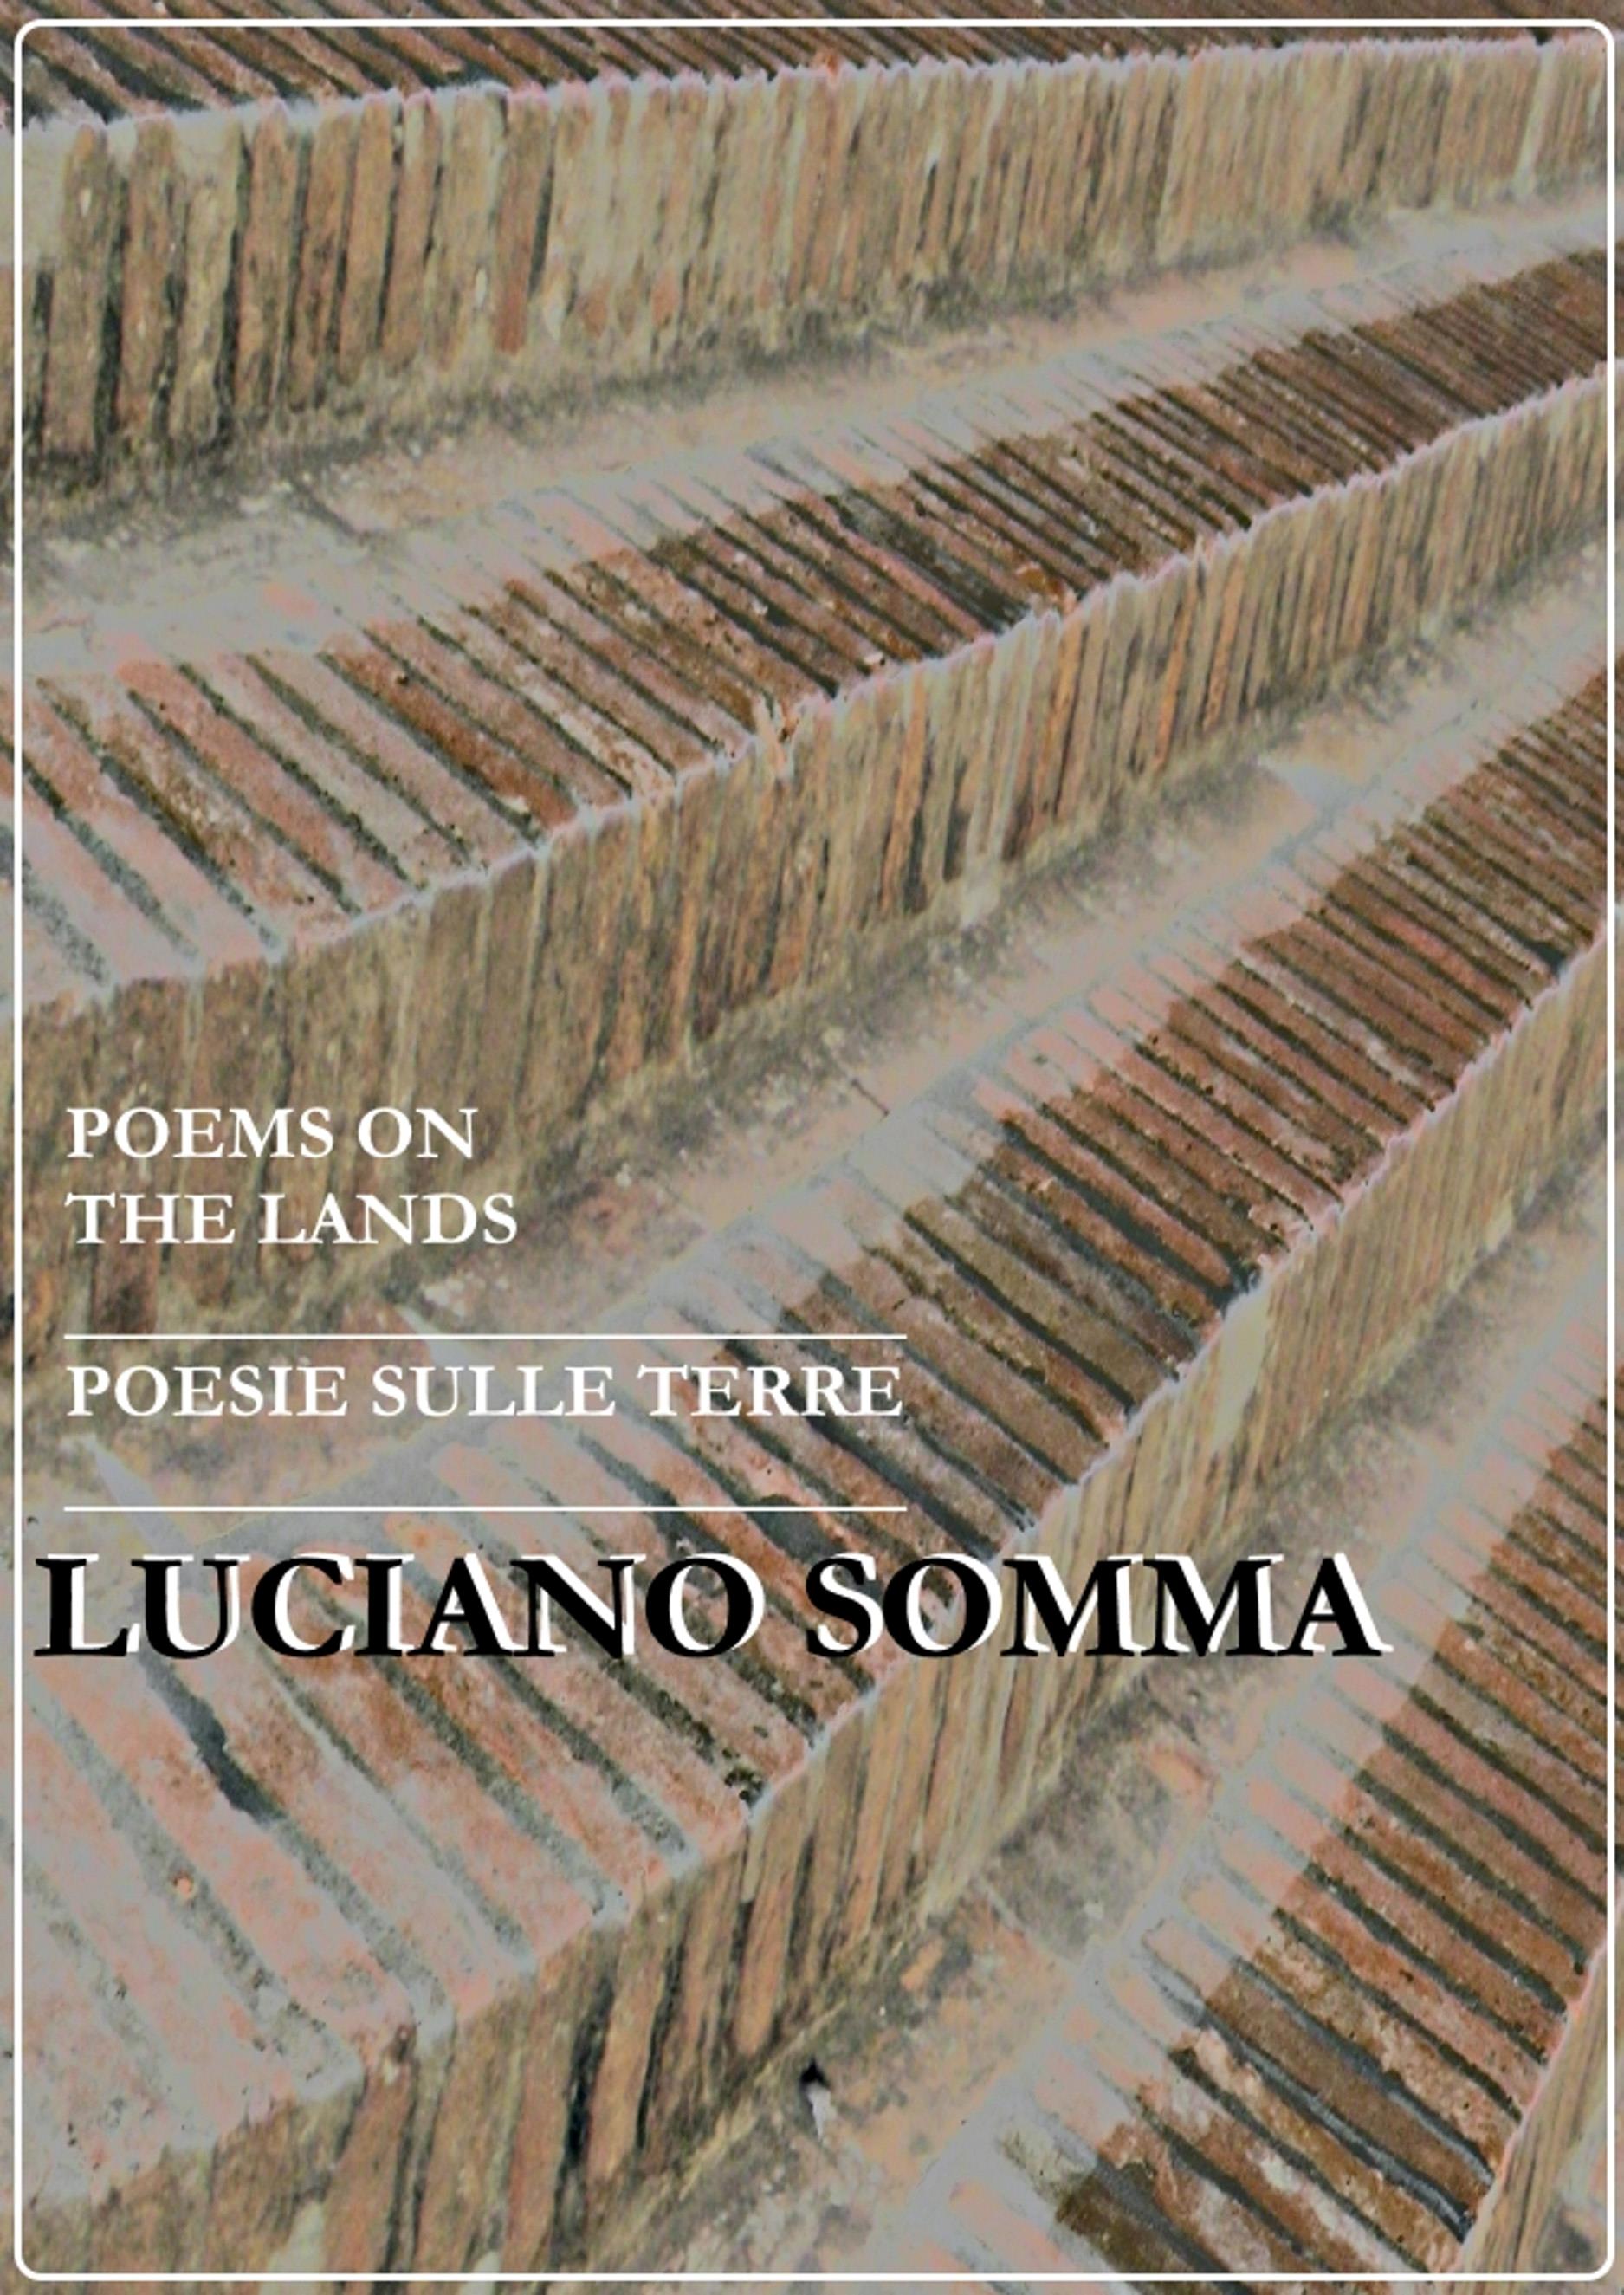 Poems on the lands. Poesie sulle terre